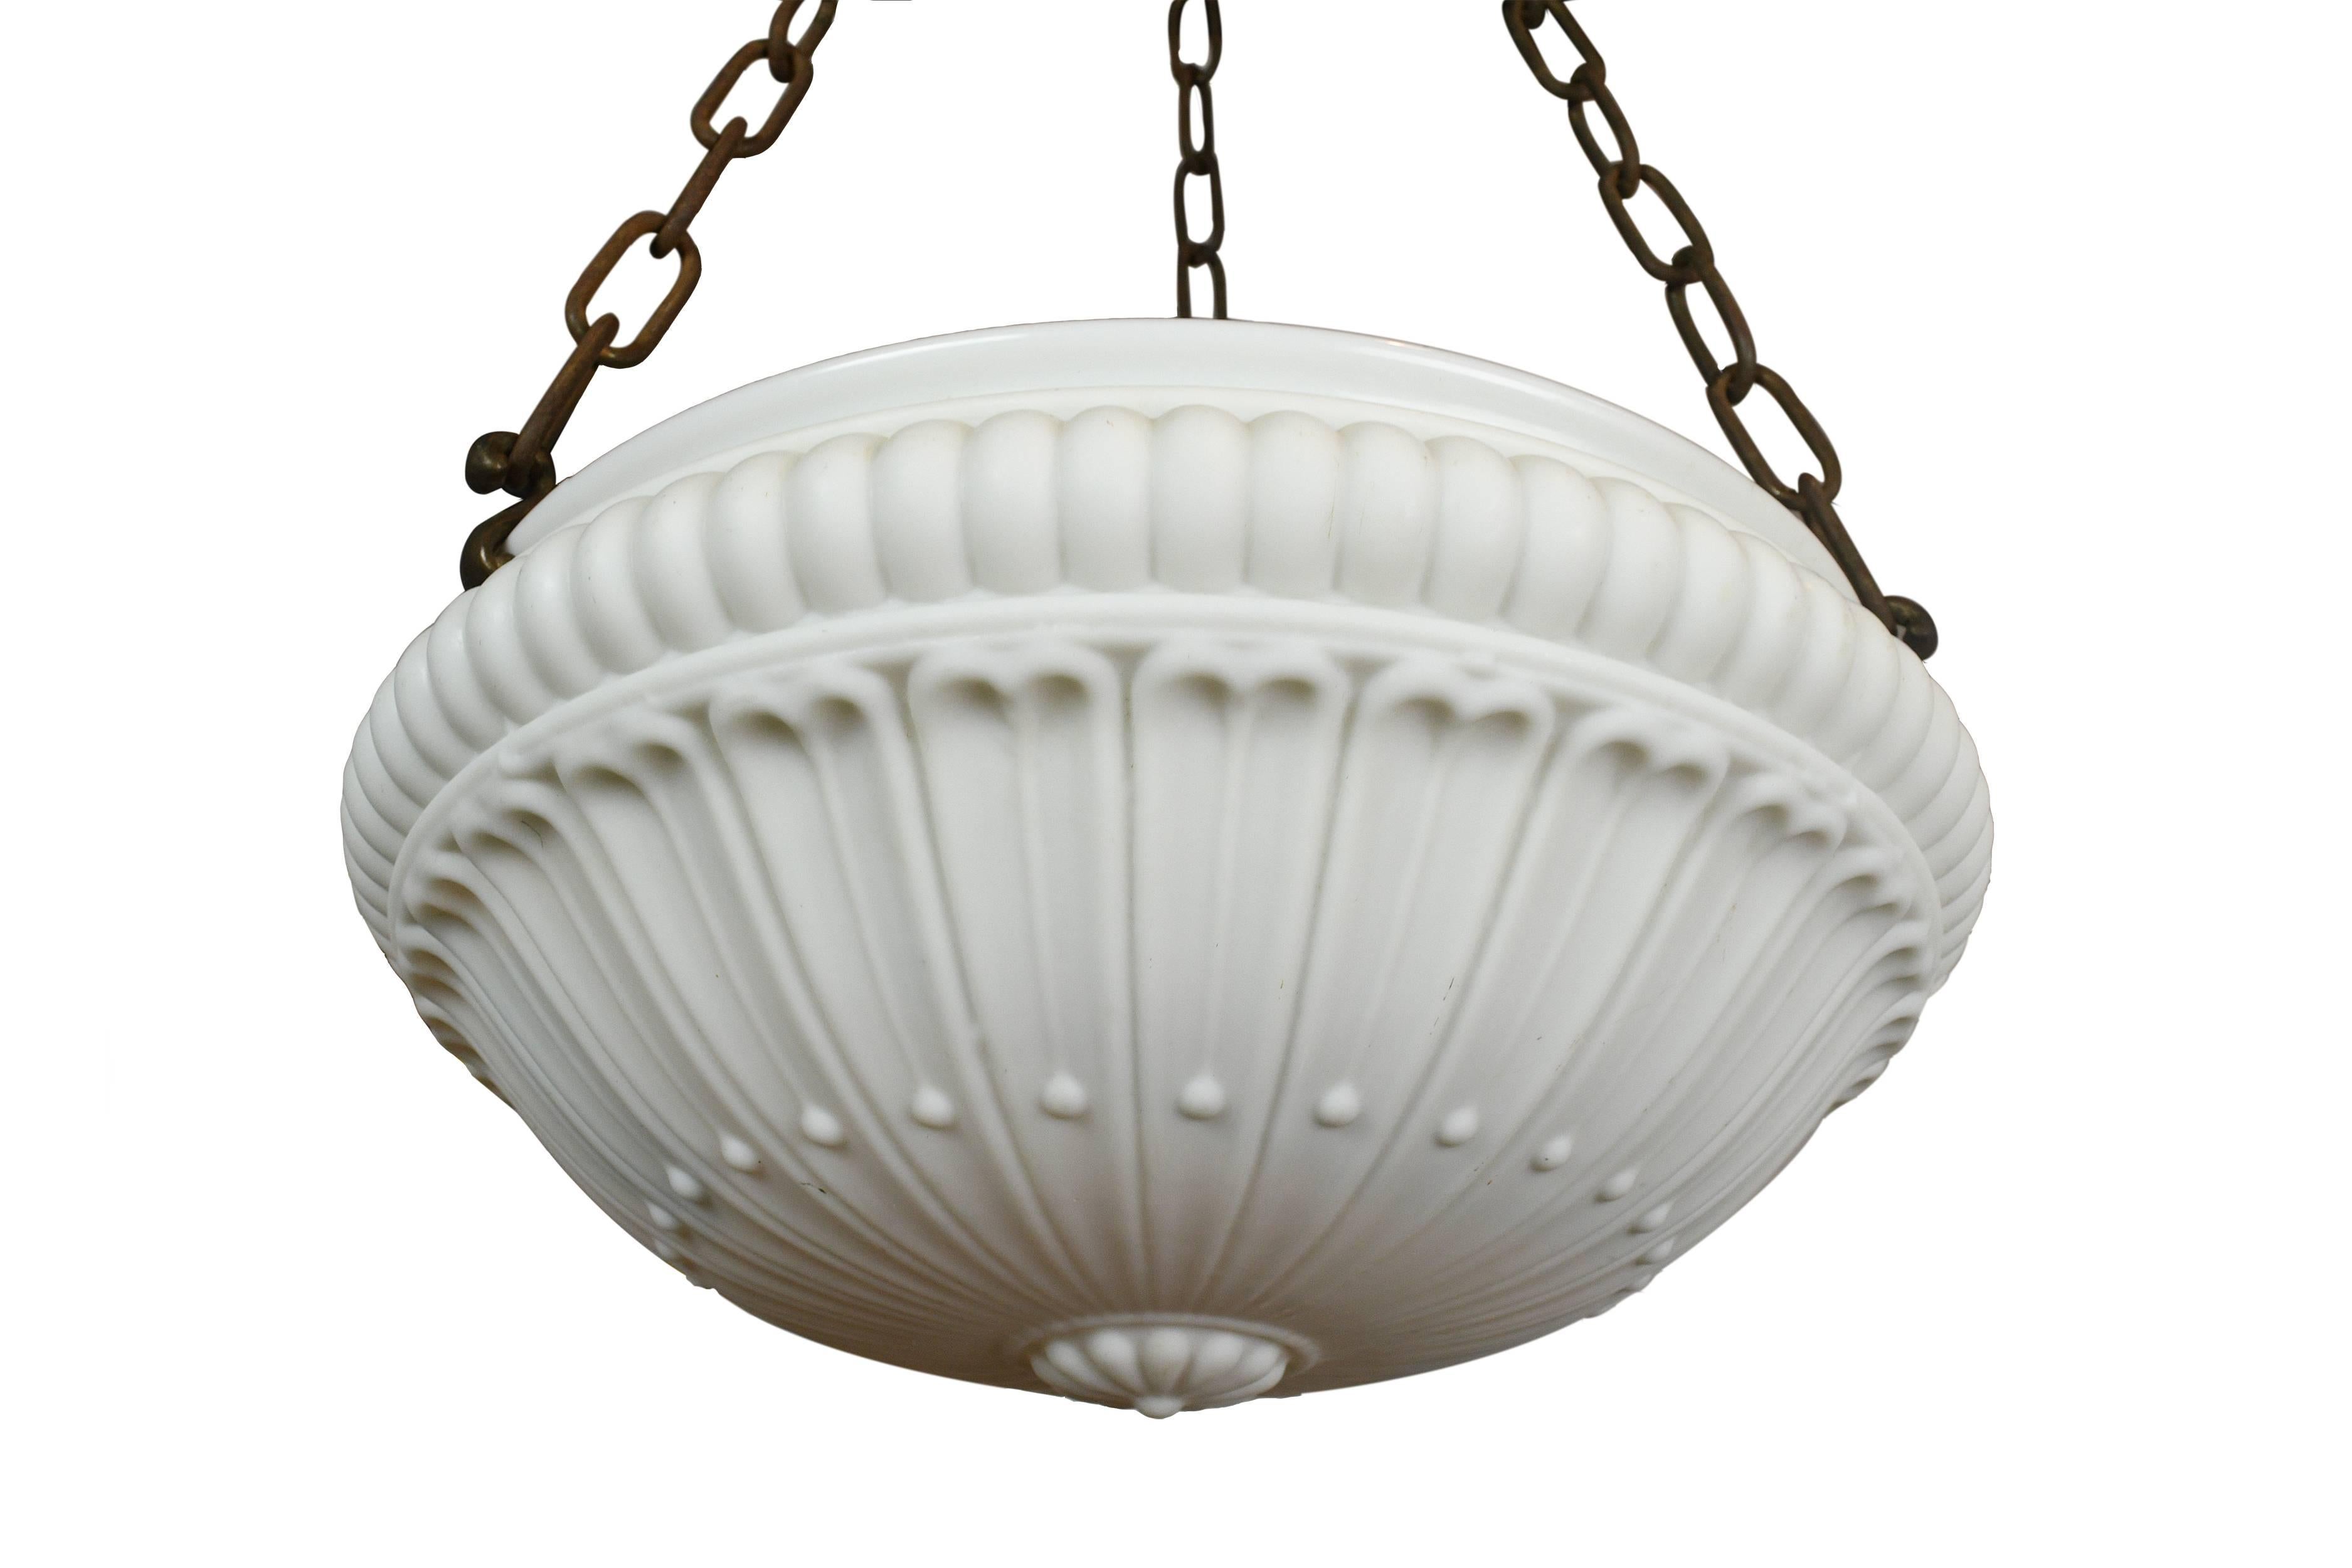 This is a very beautiful glass bowl chandelier. The glass is a milky white color with simple floral shapes on the surface. The pattern on the shade is soft and subtle. There are three sockets built in to the shade, which will help providing ample